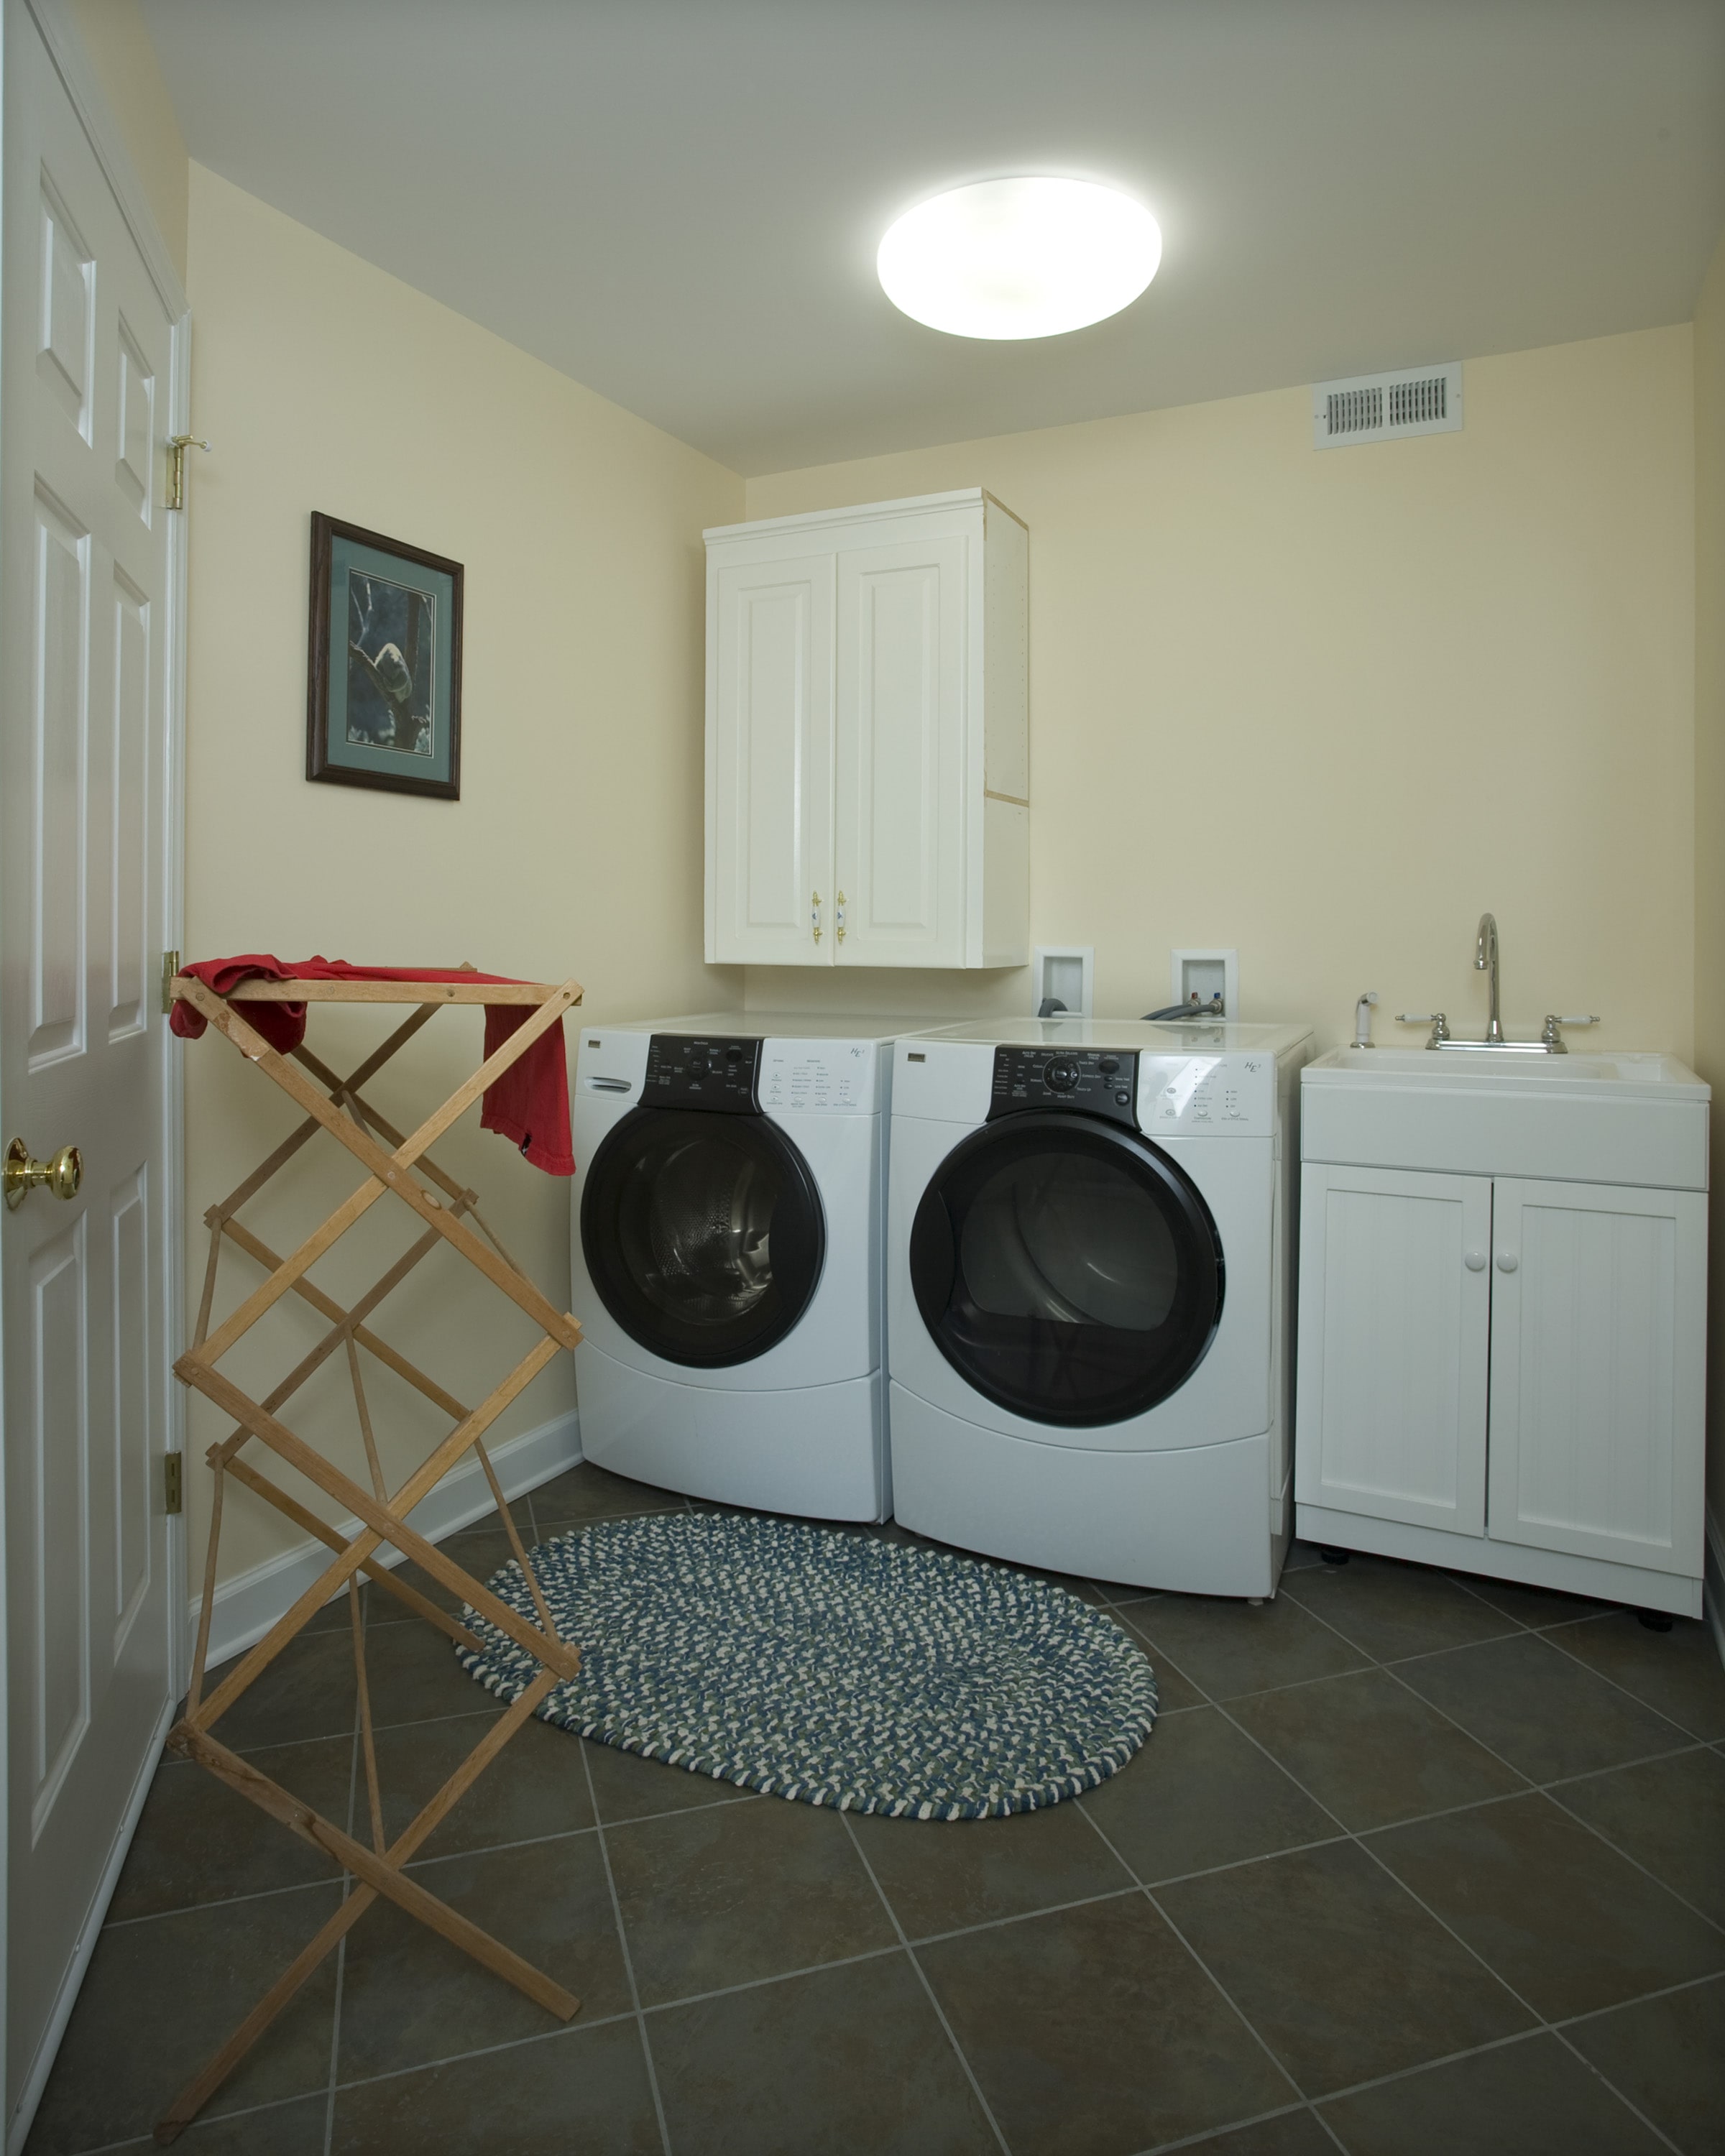 Laundry Room in new Basement Area